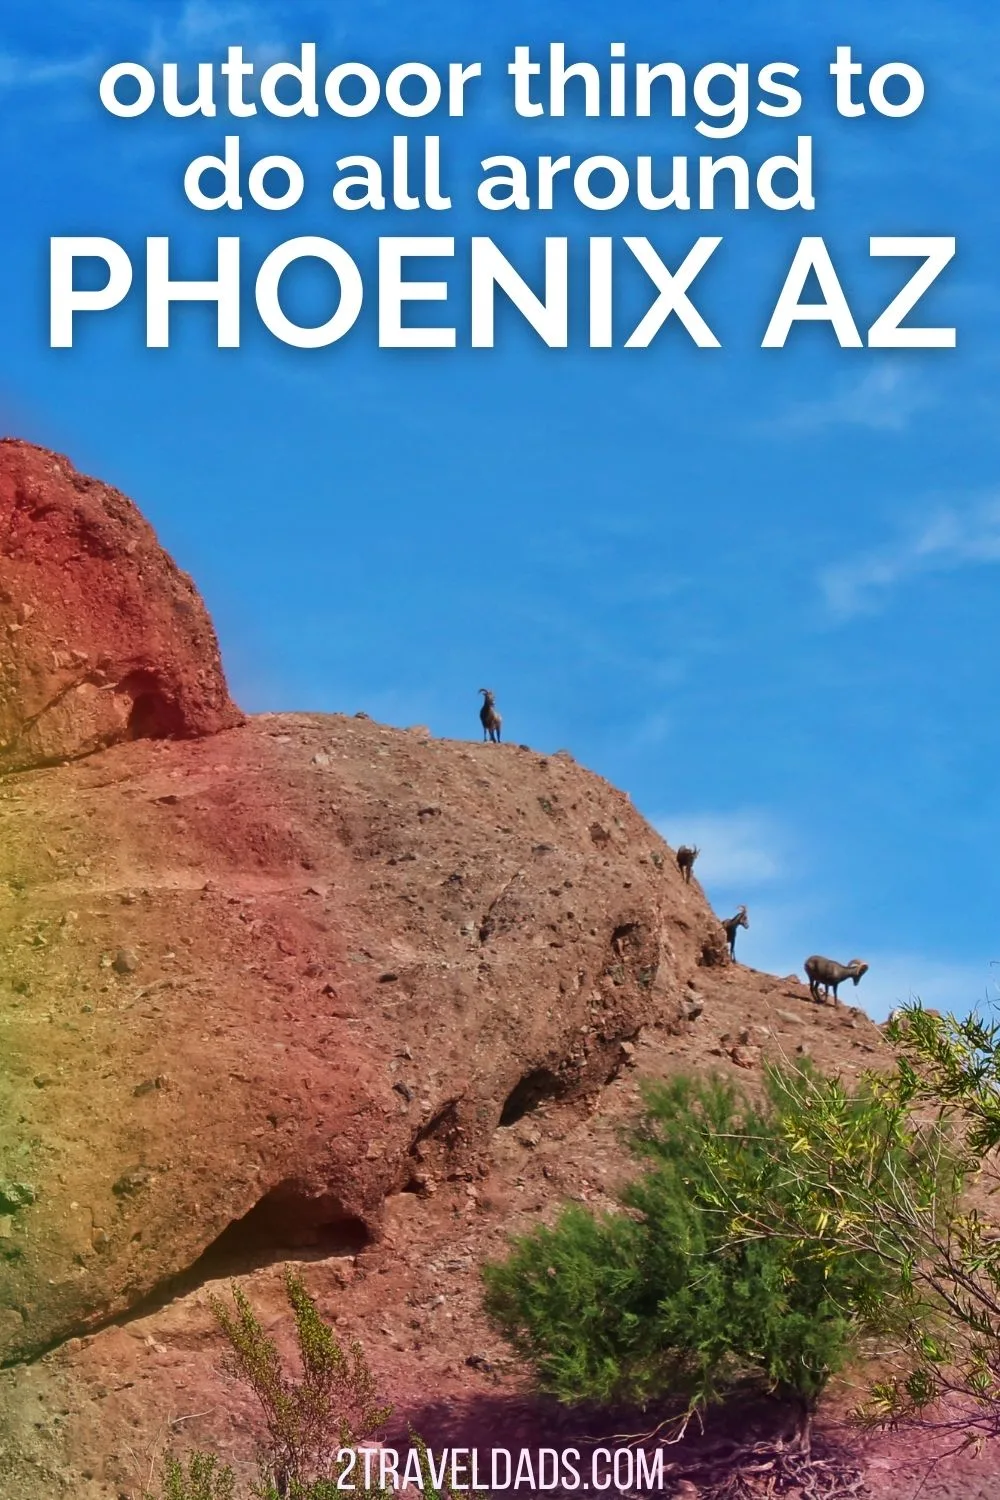 Outdoor things to do around Phoenix are plentiful, even in the heat. From getting on the water to hiking in Tonto National Forest, the best things to do outside around Phoenix.